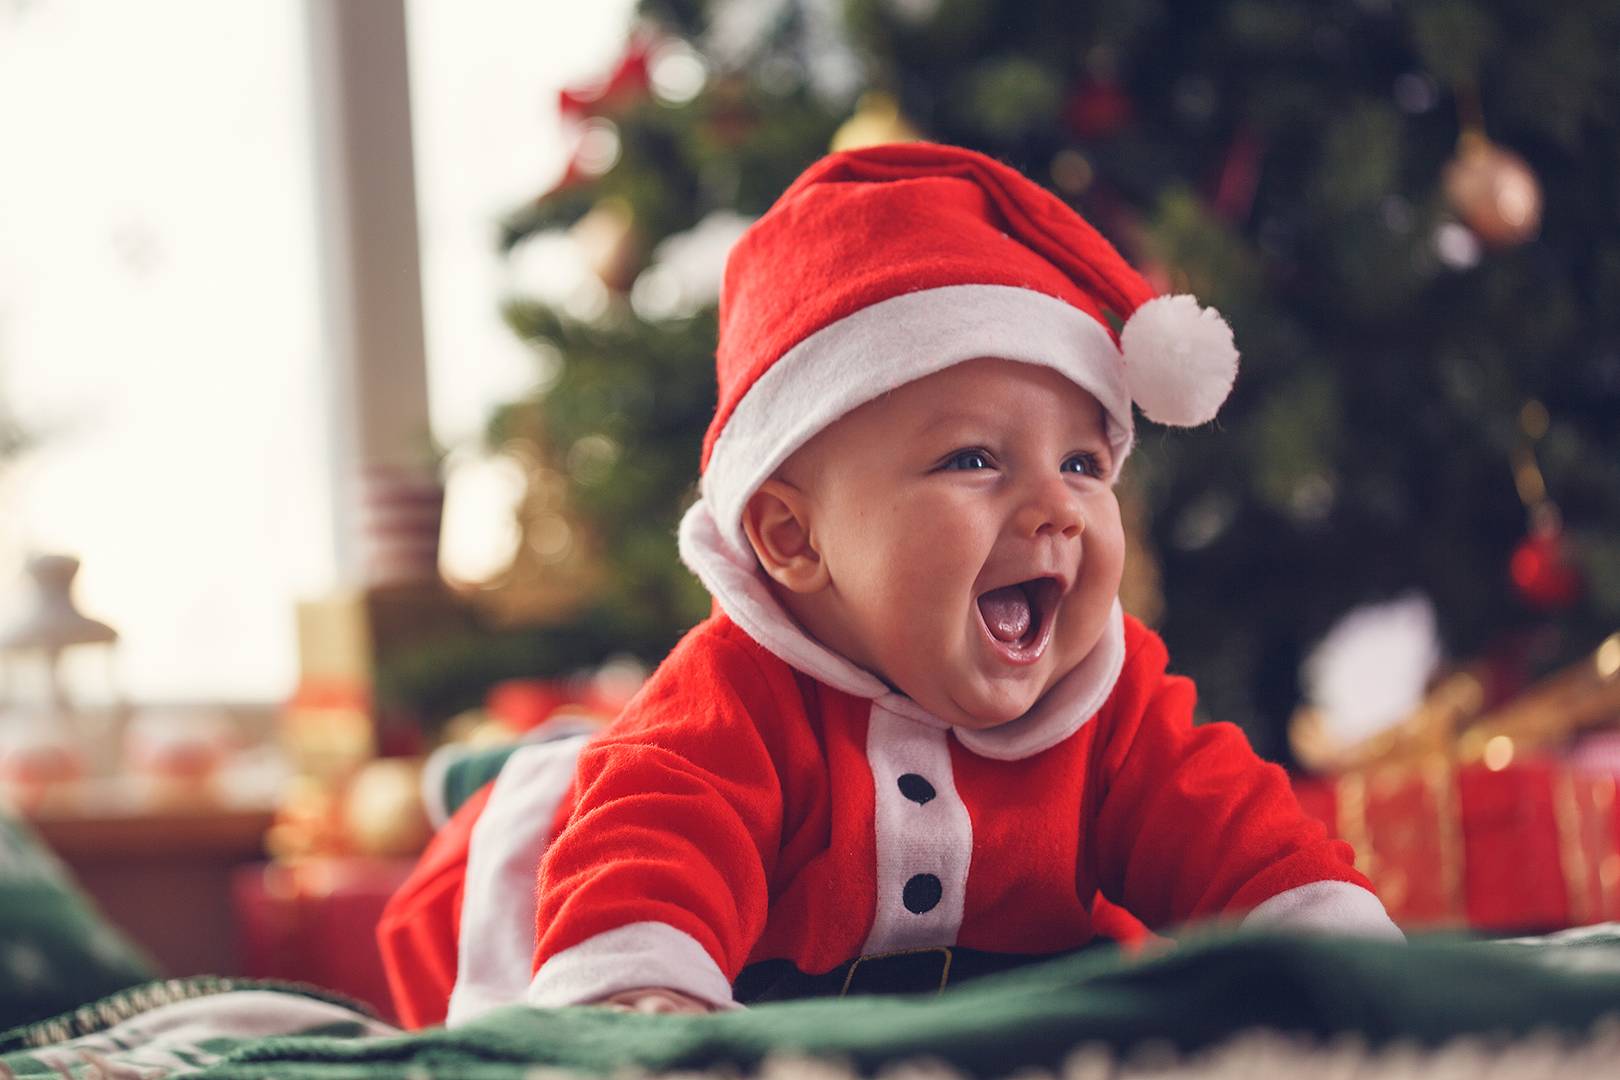 The first Christmas with your child!